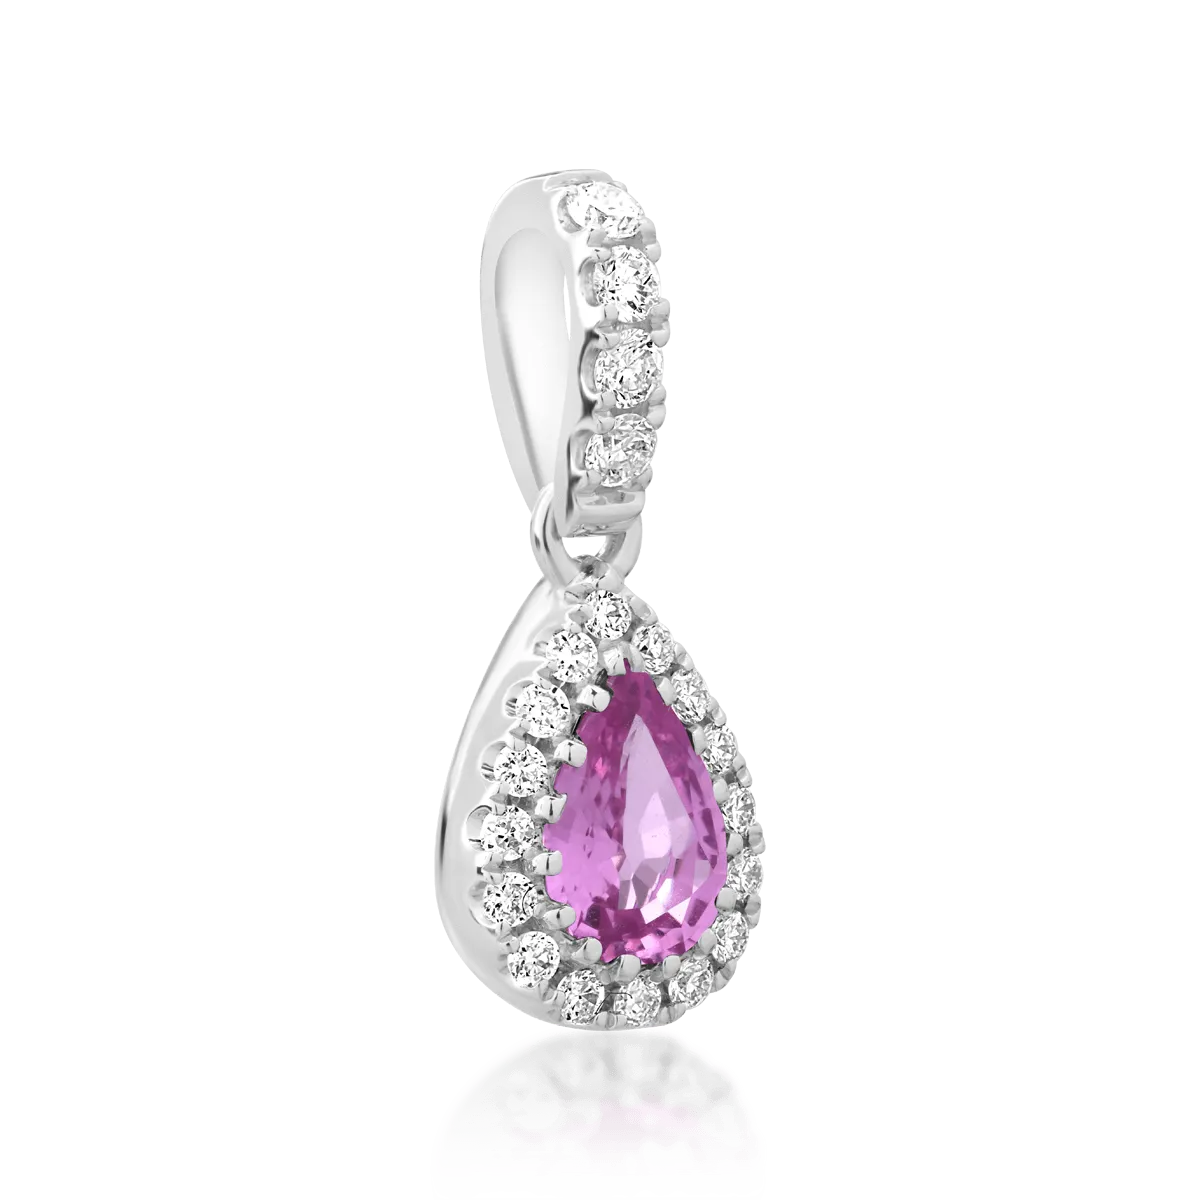 18K white gold pendant with 0.47ct pink sapphire and 0.13ct diamonds